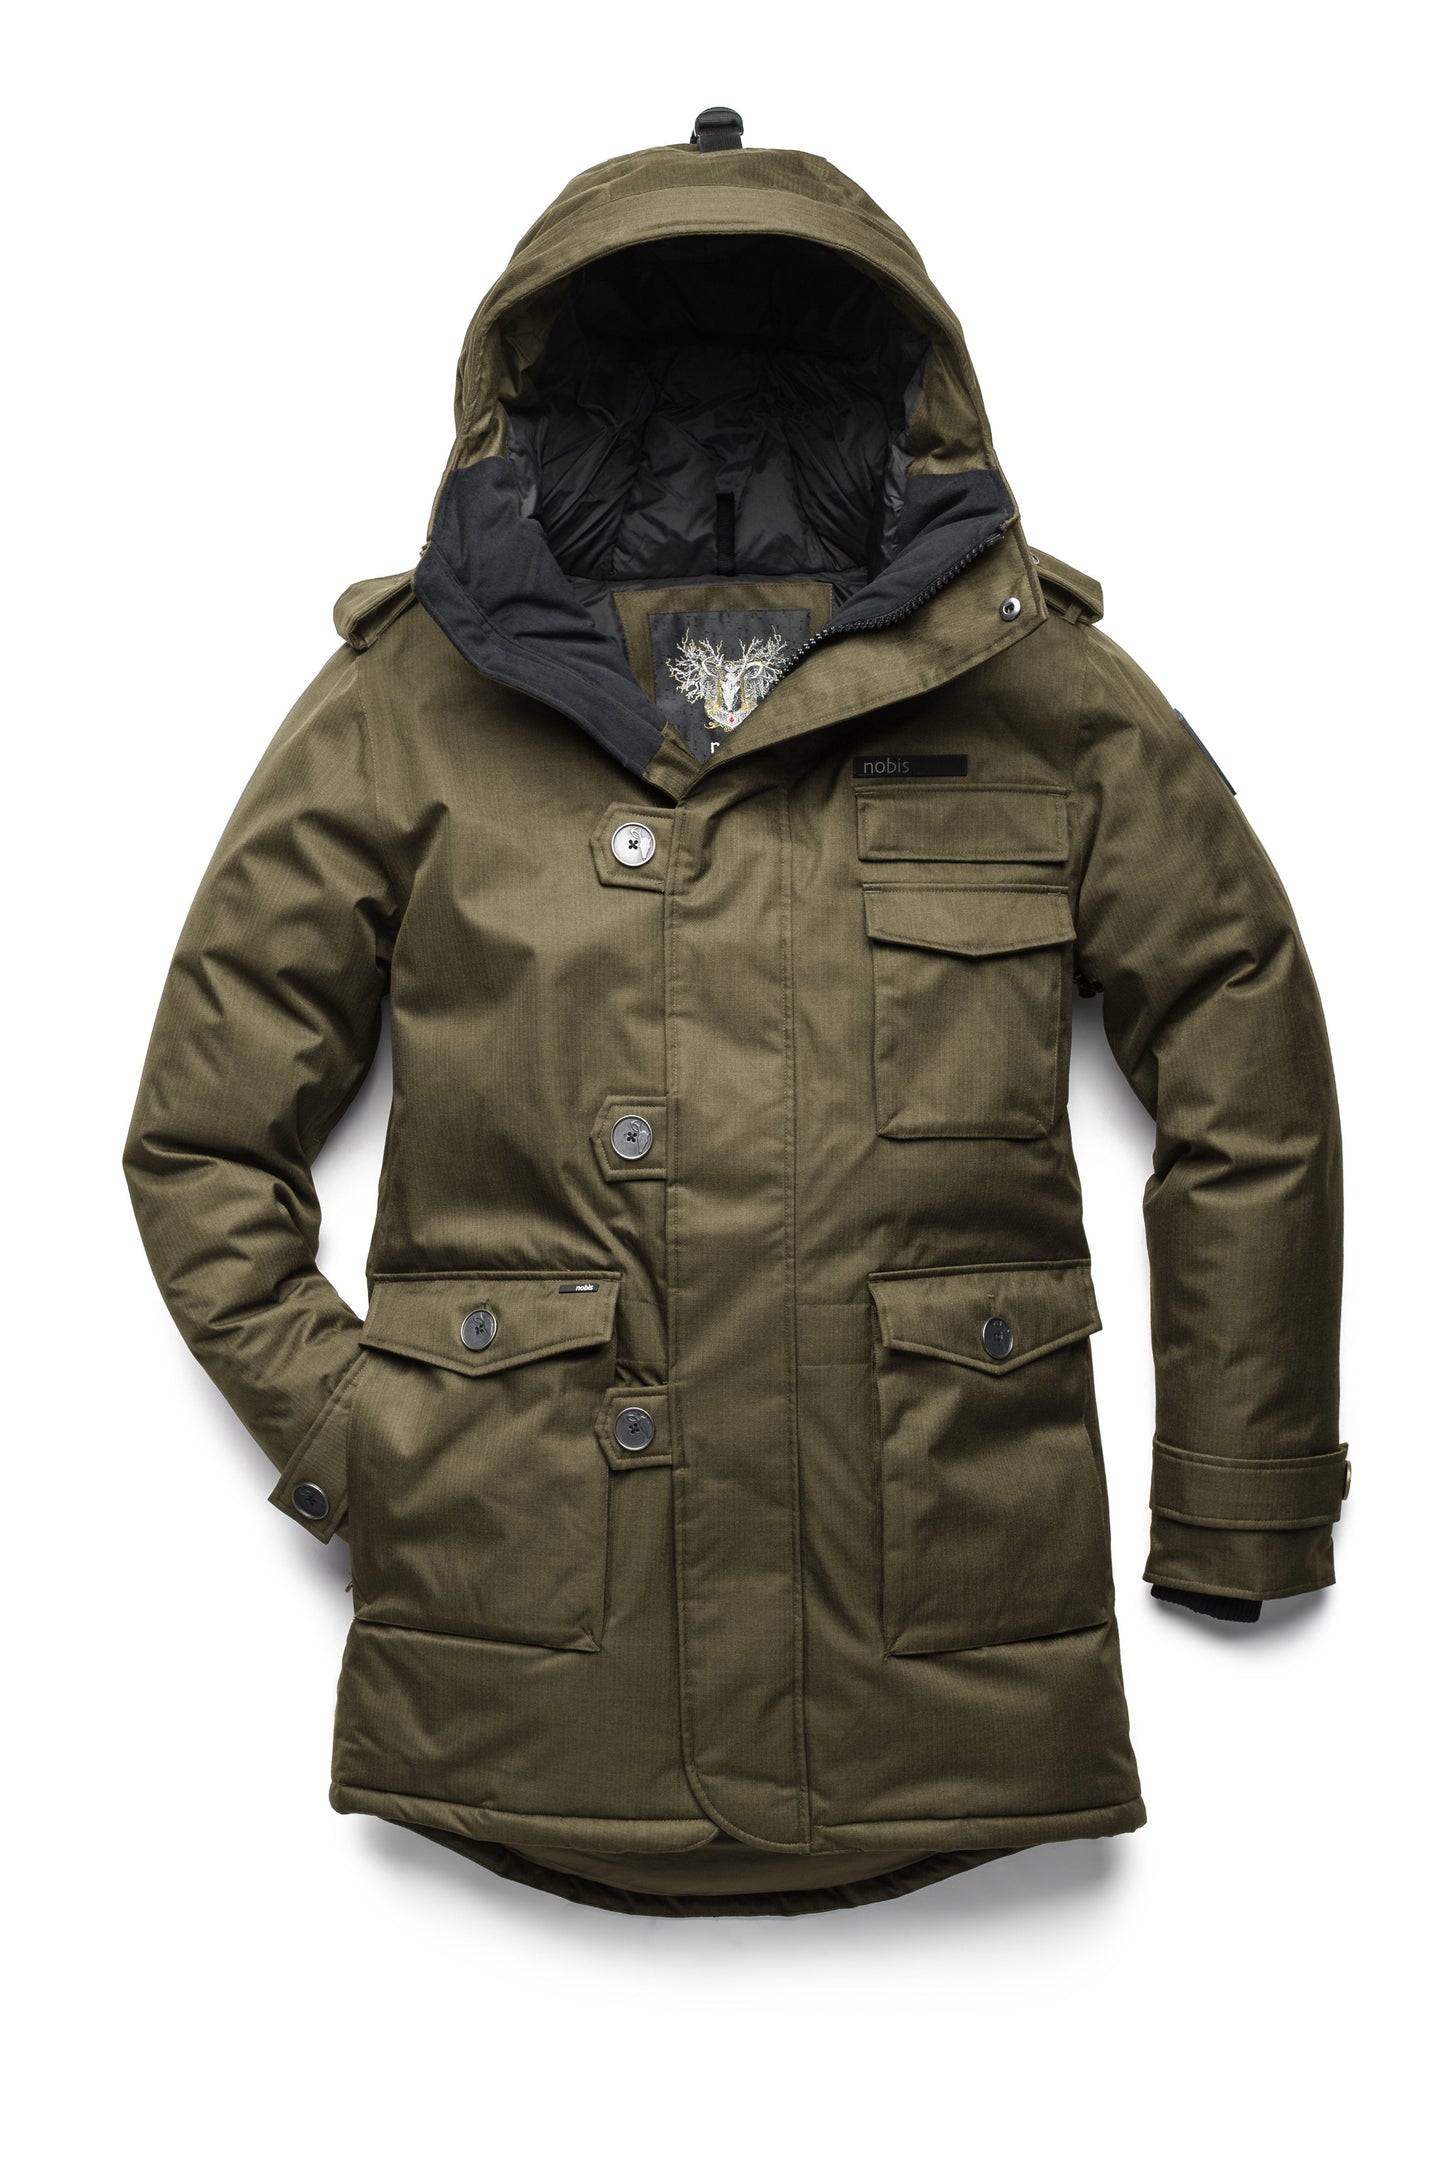 Men's down filled parka with faux button magnet closures and fur free hood with a fishtail hemline in Fatigue